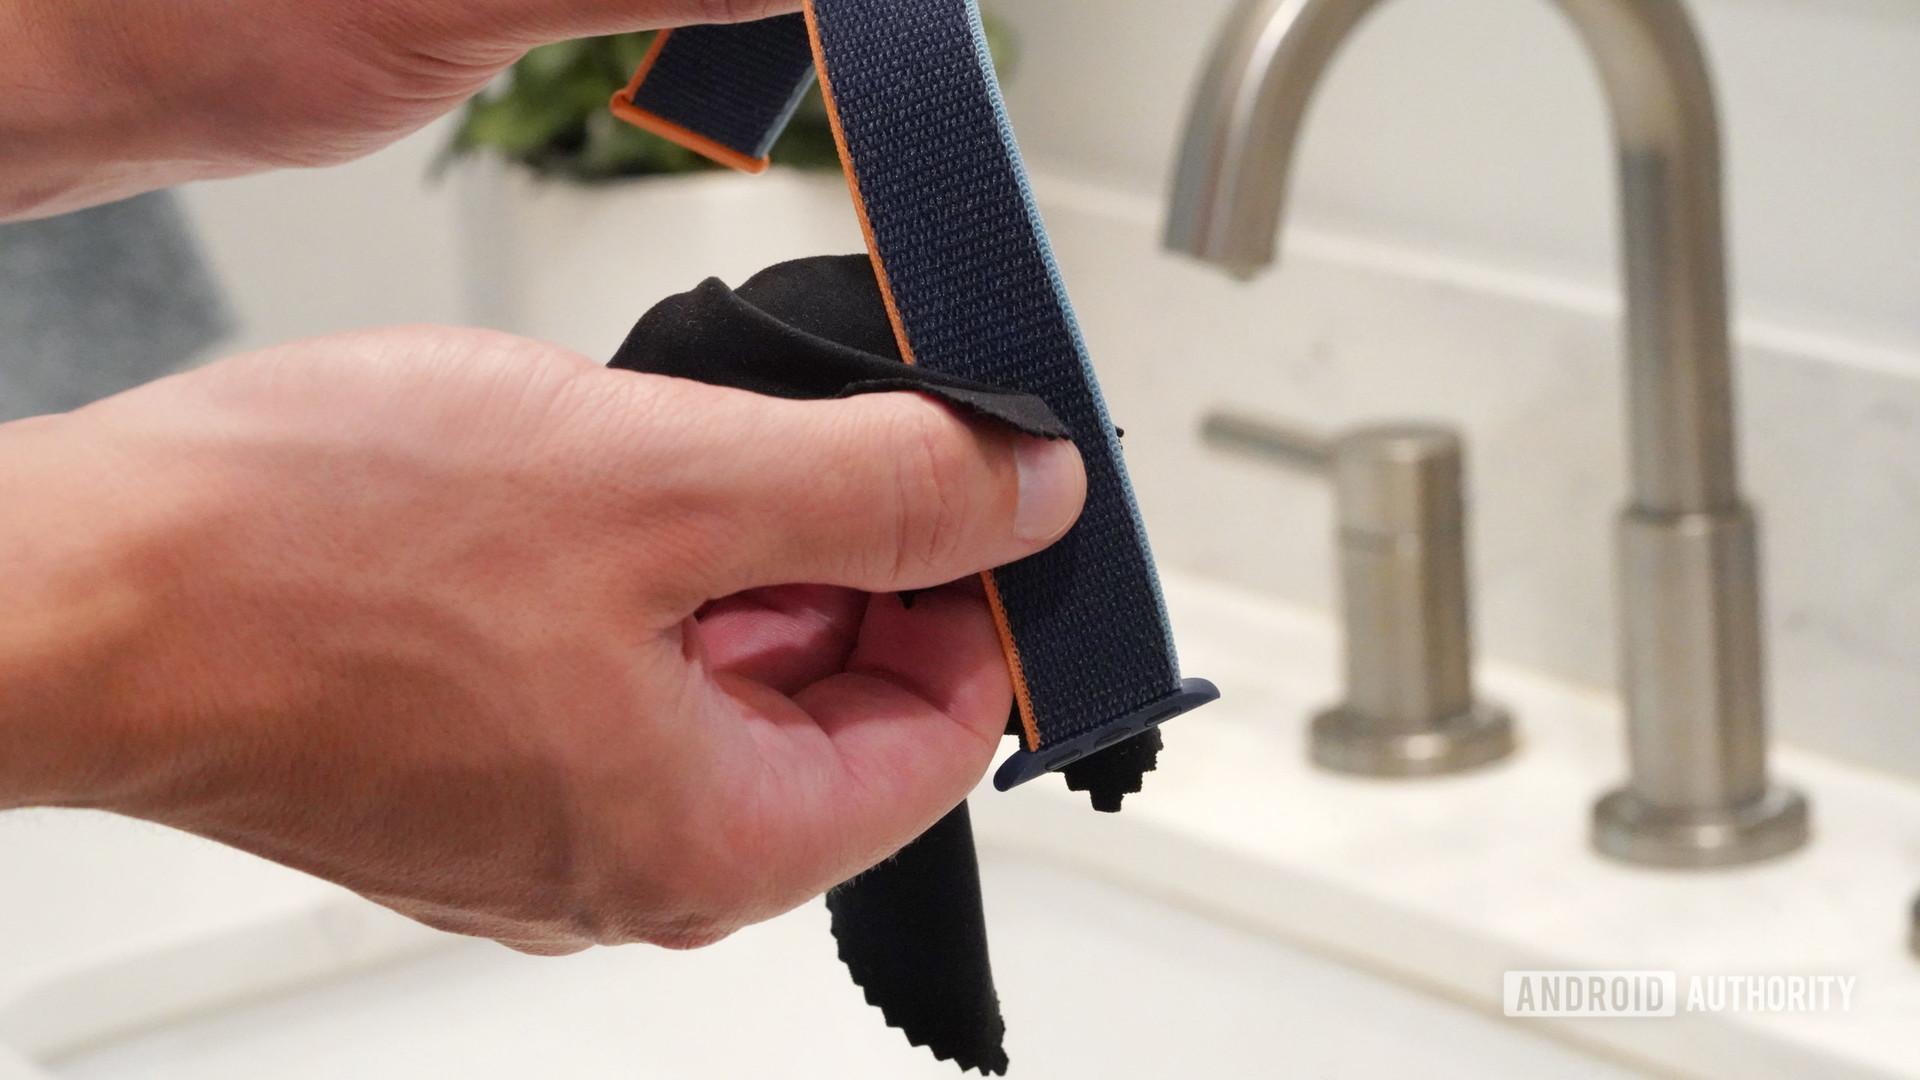 Use a non-abrasive, lint-free cloth with male hands to clean the nylon Apple Watch strap.